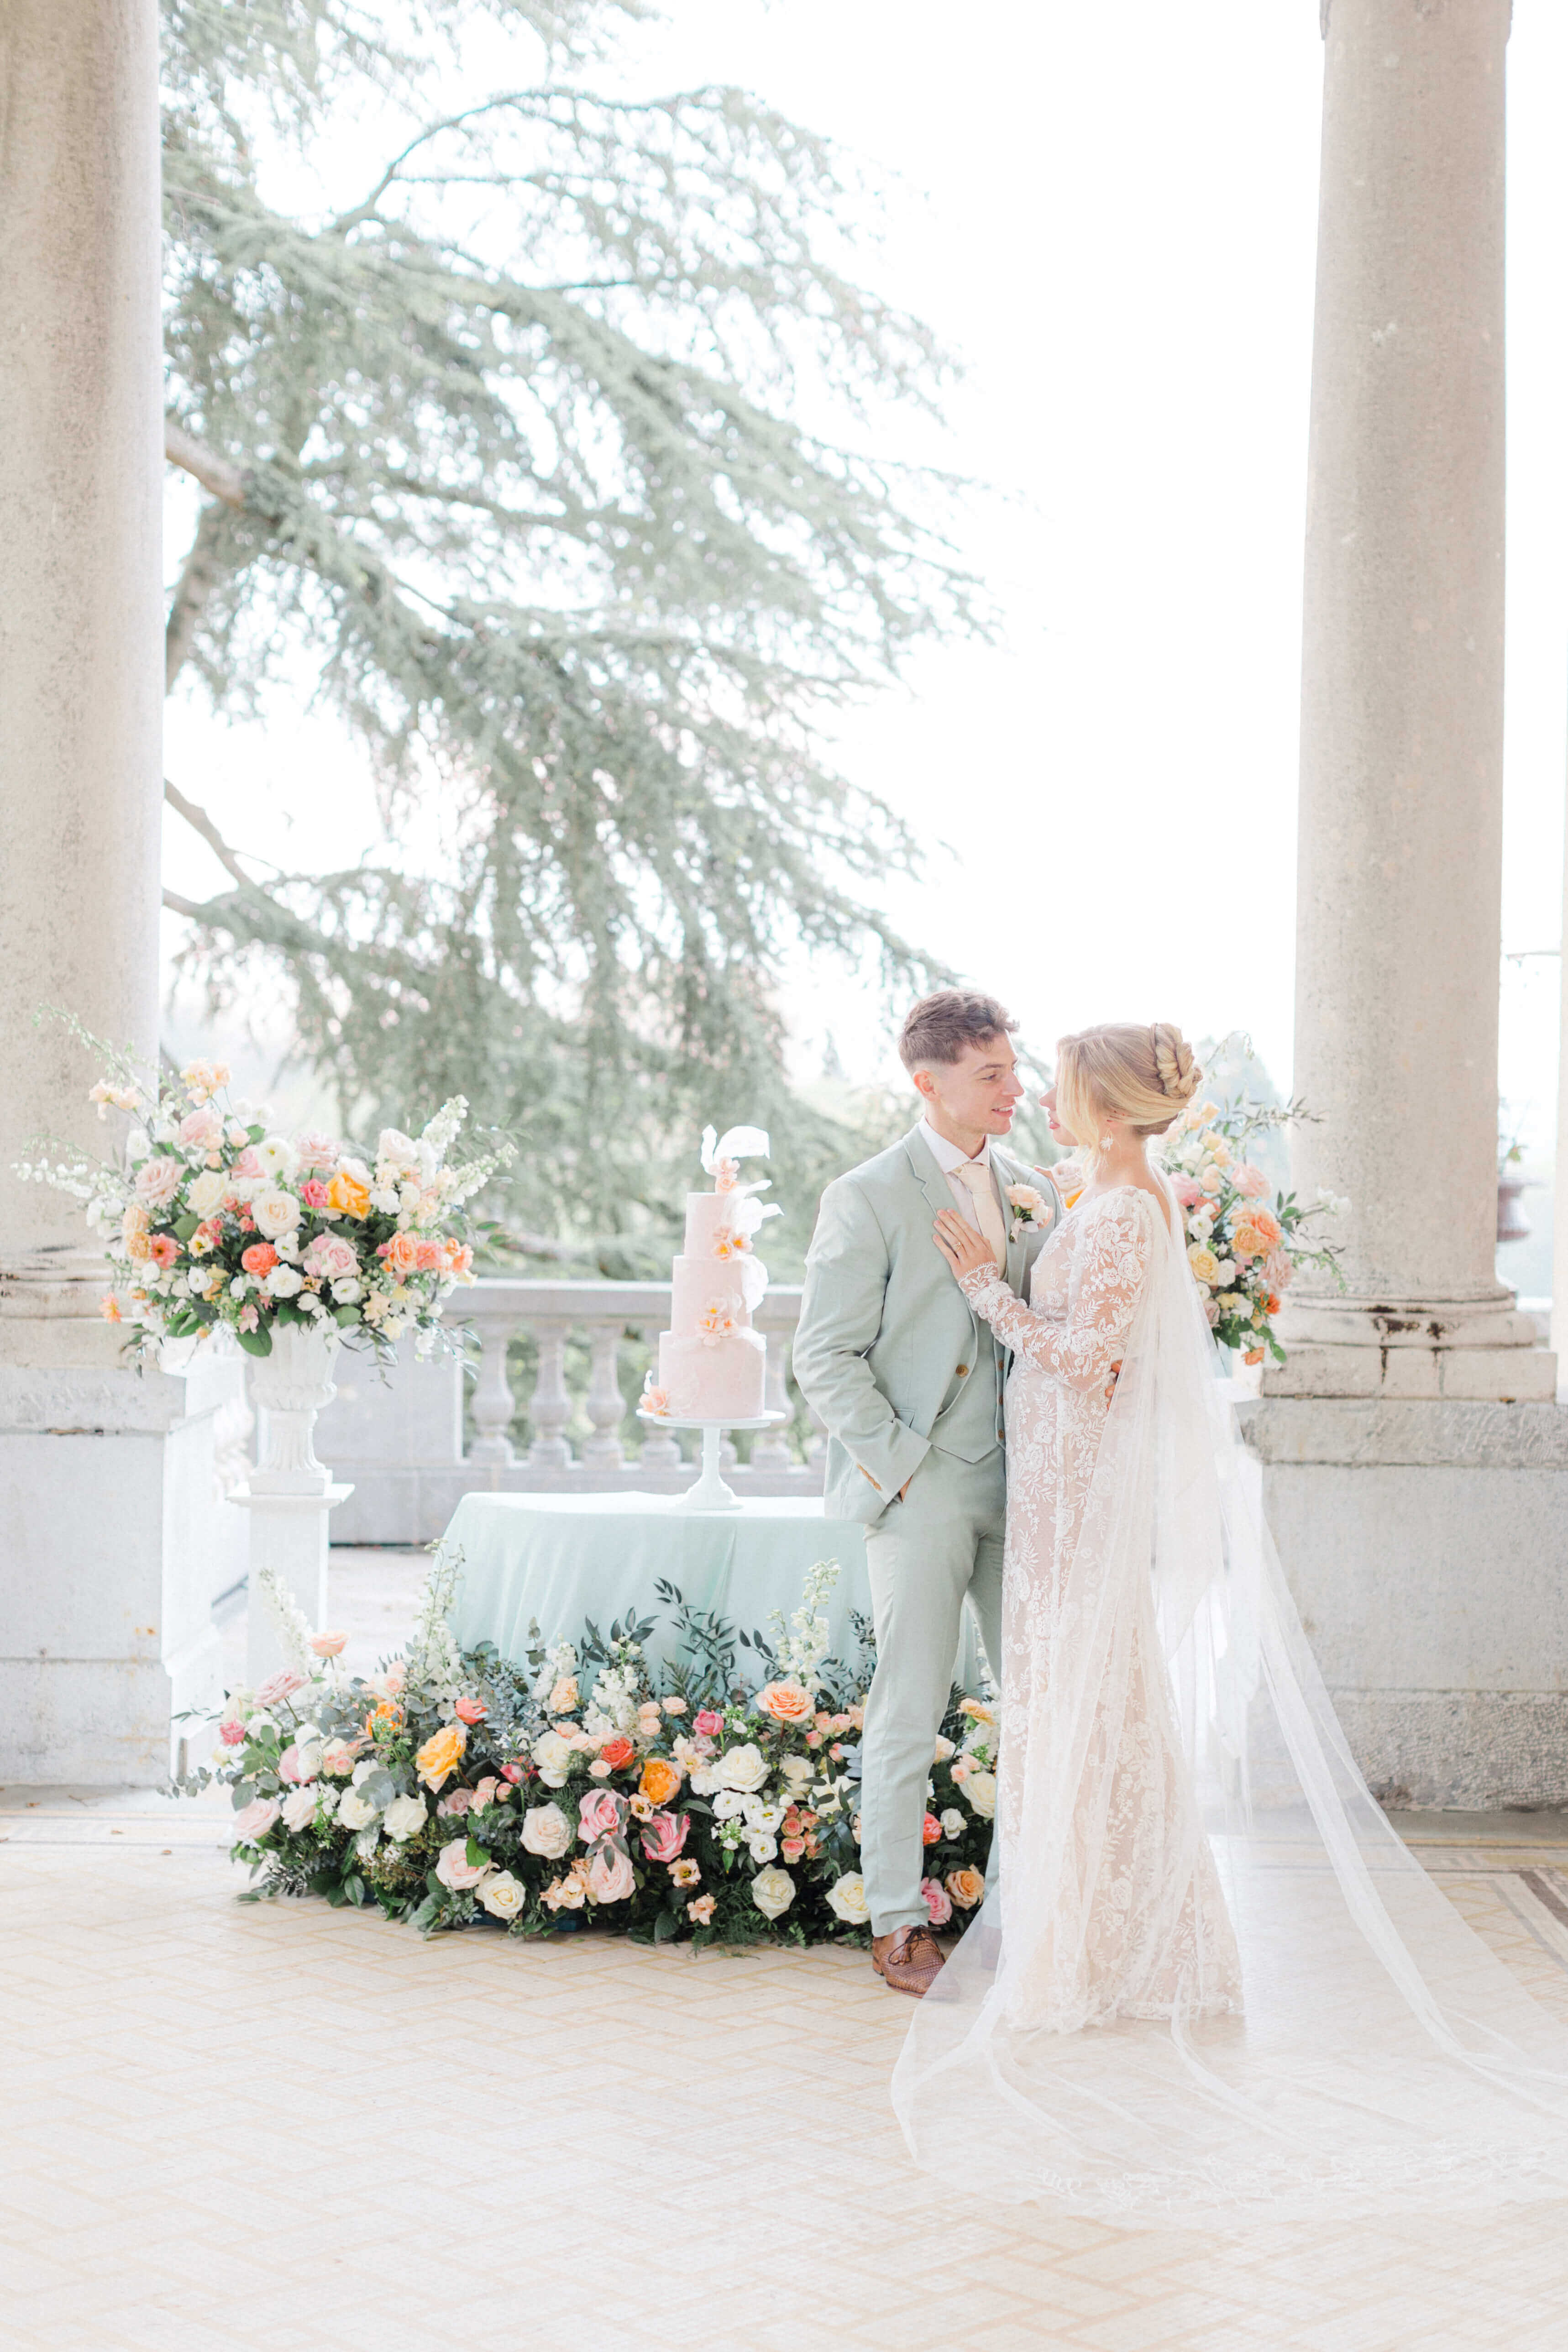 pastel peach cake under a terrace at chateau bouffemont.  the cake is sitting on a table covered by mint linen, surrounded by pastel pink, peach and cream floral meadows and and on both sides 2 plinths with similar florals. Newly weds in front of it. the groom is wearing a mint tux and cream tie on a white shirt. The bride's hair is tied in a high bun and she's wearing a low cut decoletté lace dress with long sleeves